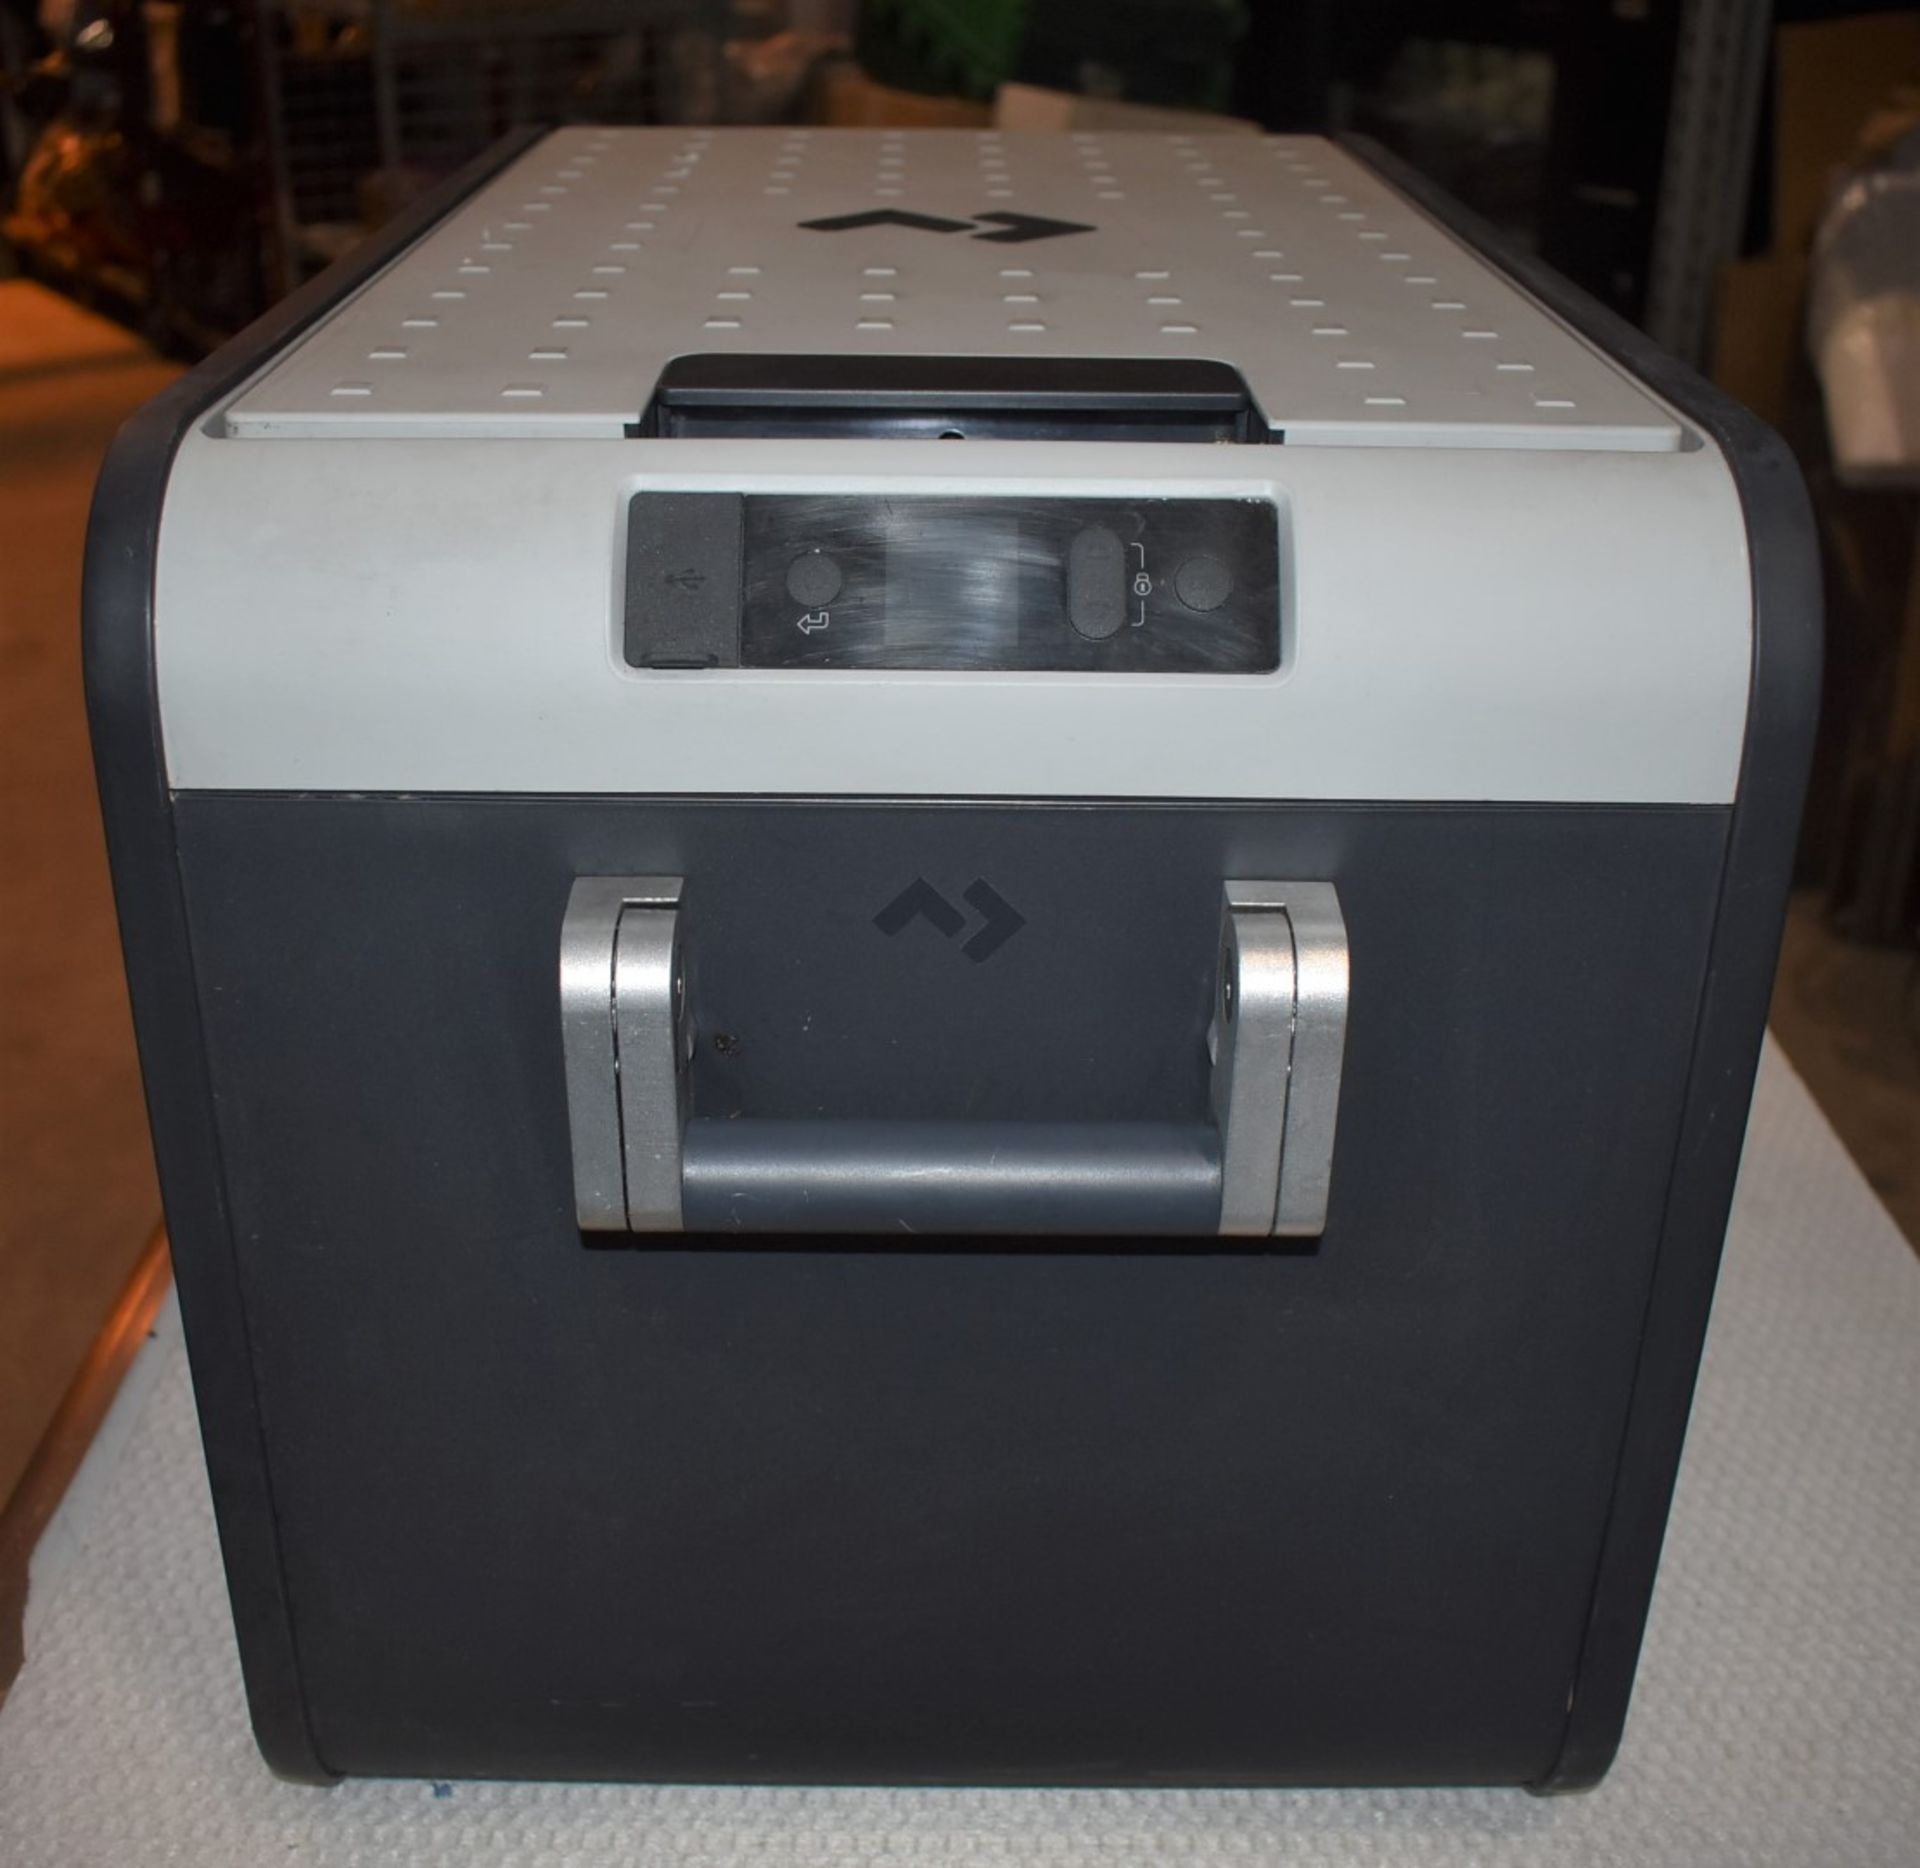 1 x Dometic CFX3 35 Portable 32l Compressor Cooler and Freezer - Perfect For Cooling The Christmas - Image 9 of 10